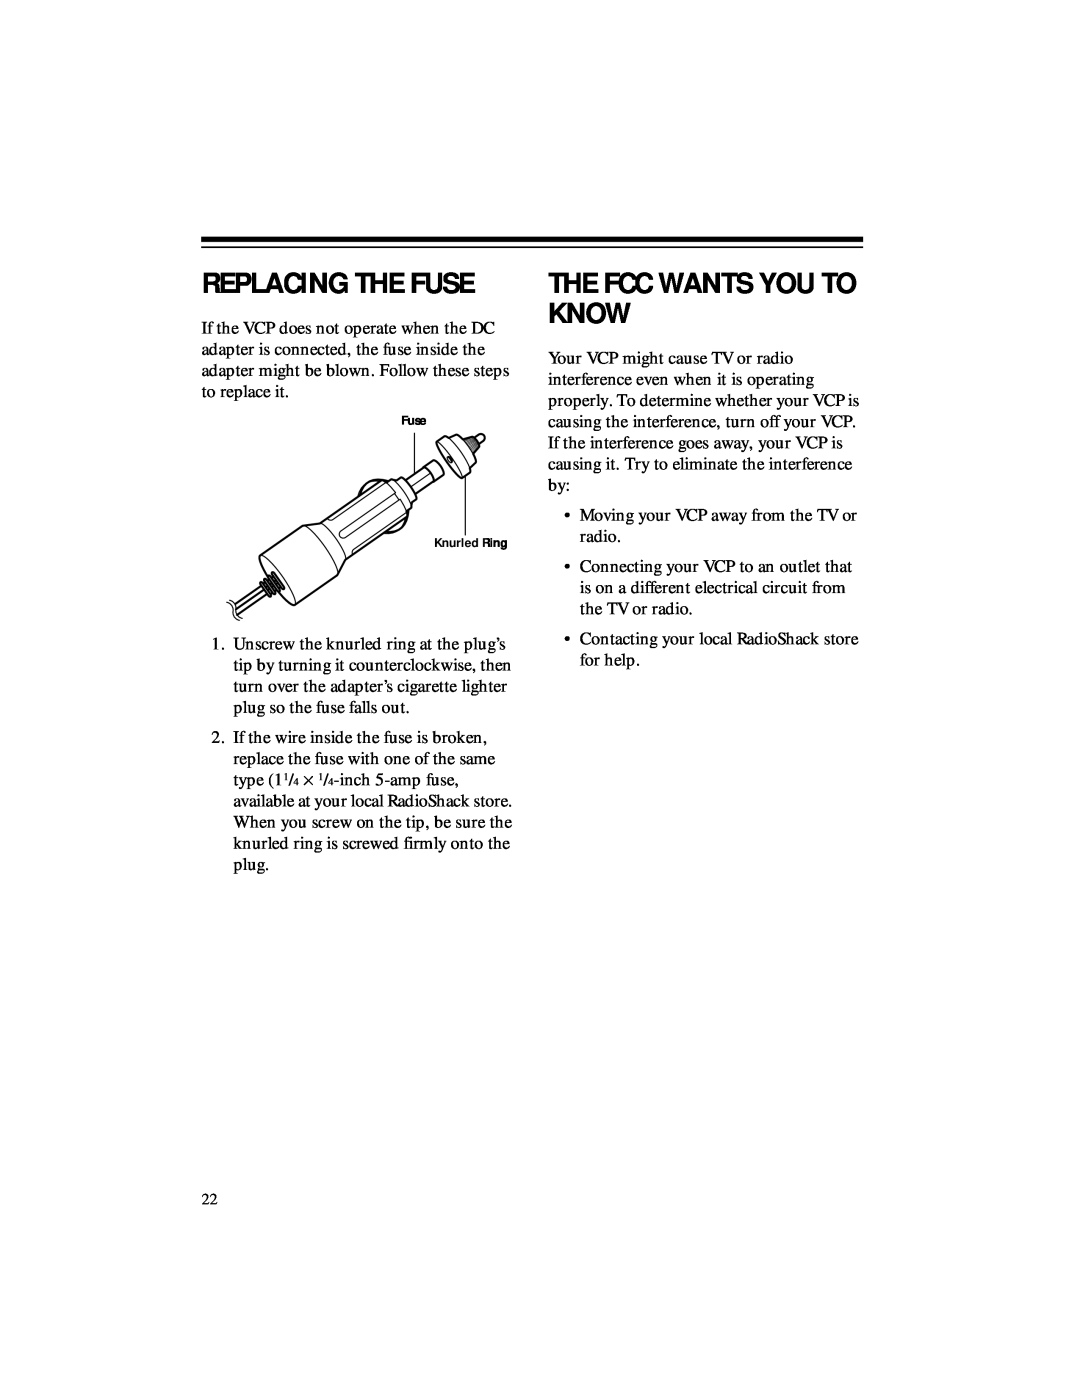 RCA 50, 40 owner manual Replacing The Fuse, The Fcc Wants You To Know 